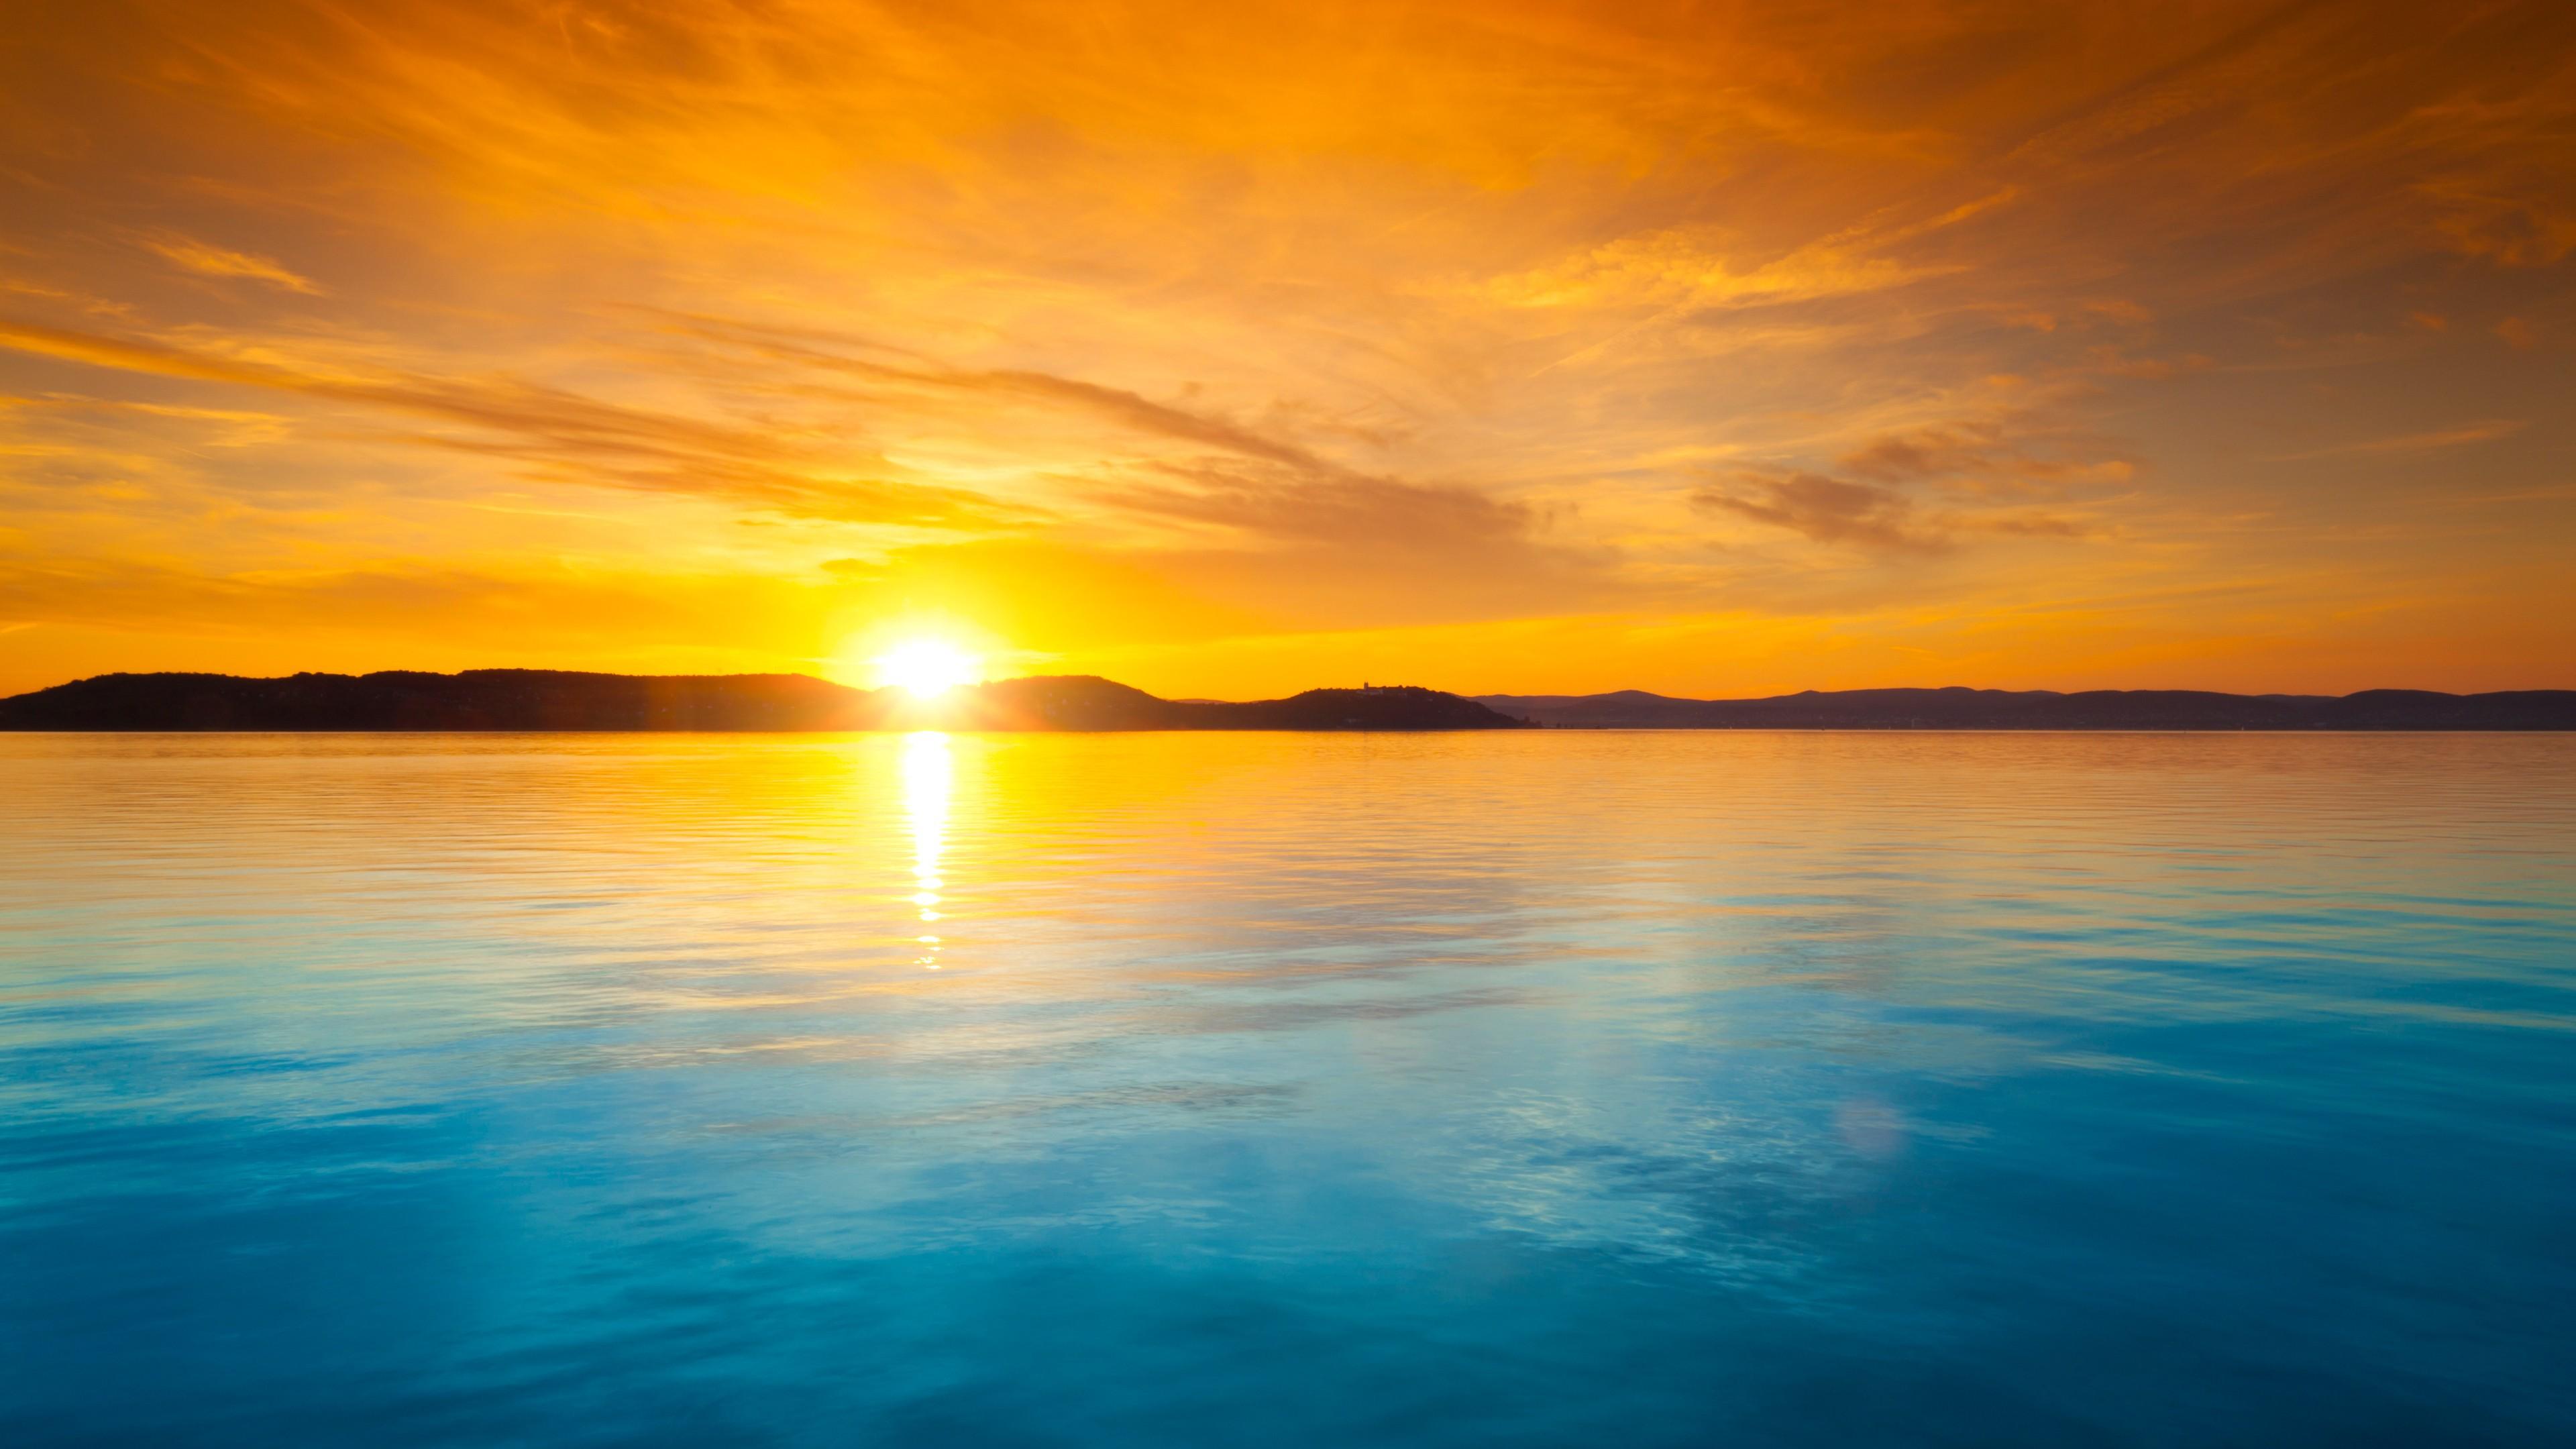 Orange sky over the blue water at sunset wallpaper and image